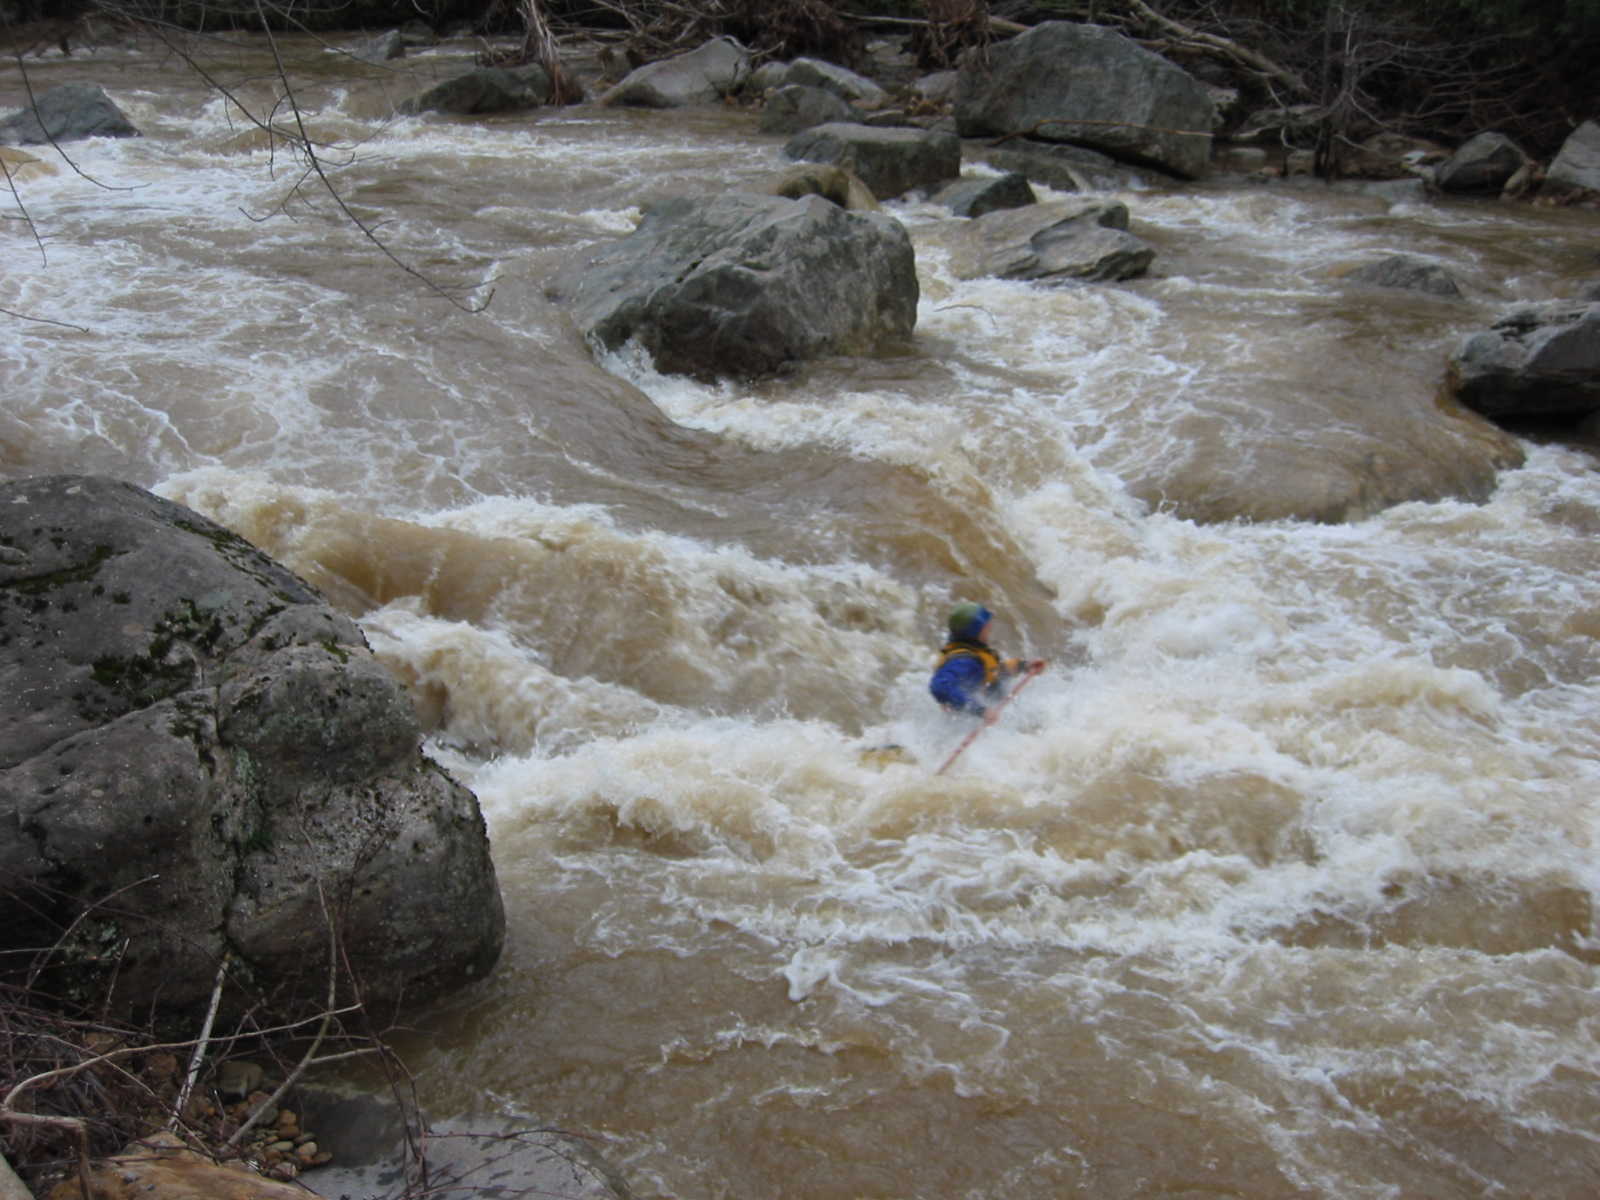 Jim Pruitt burying canoe in main hole of the big South Fork rapid (Photo by Lou Campagna - 4/26/04)